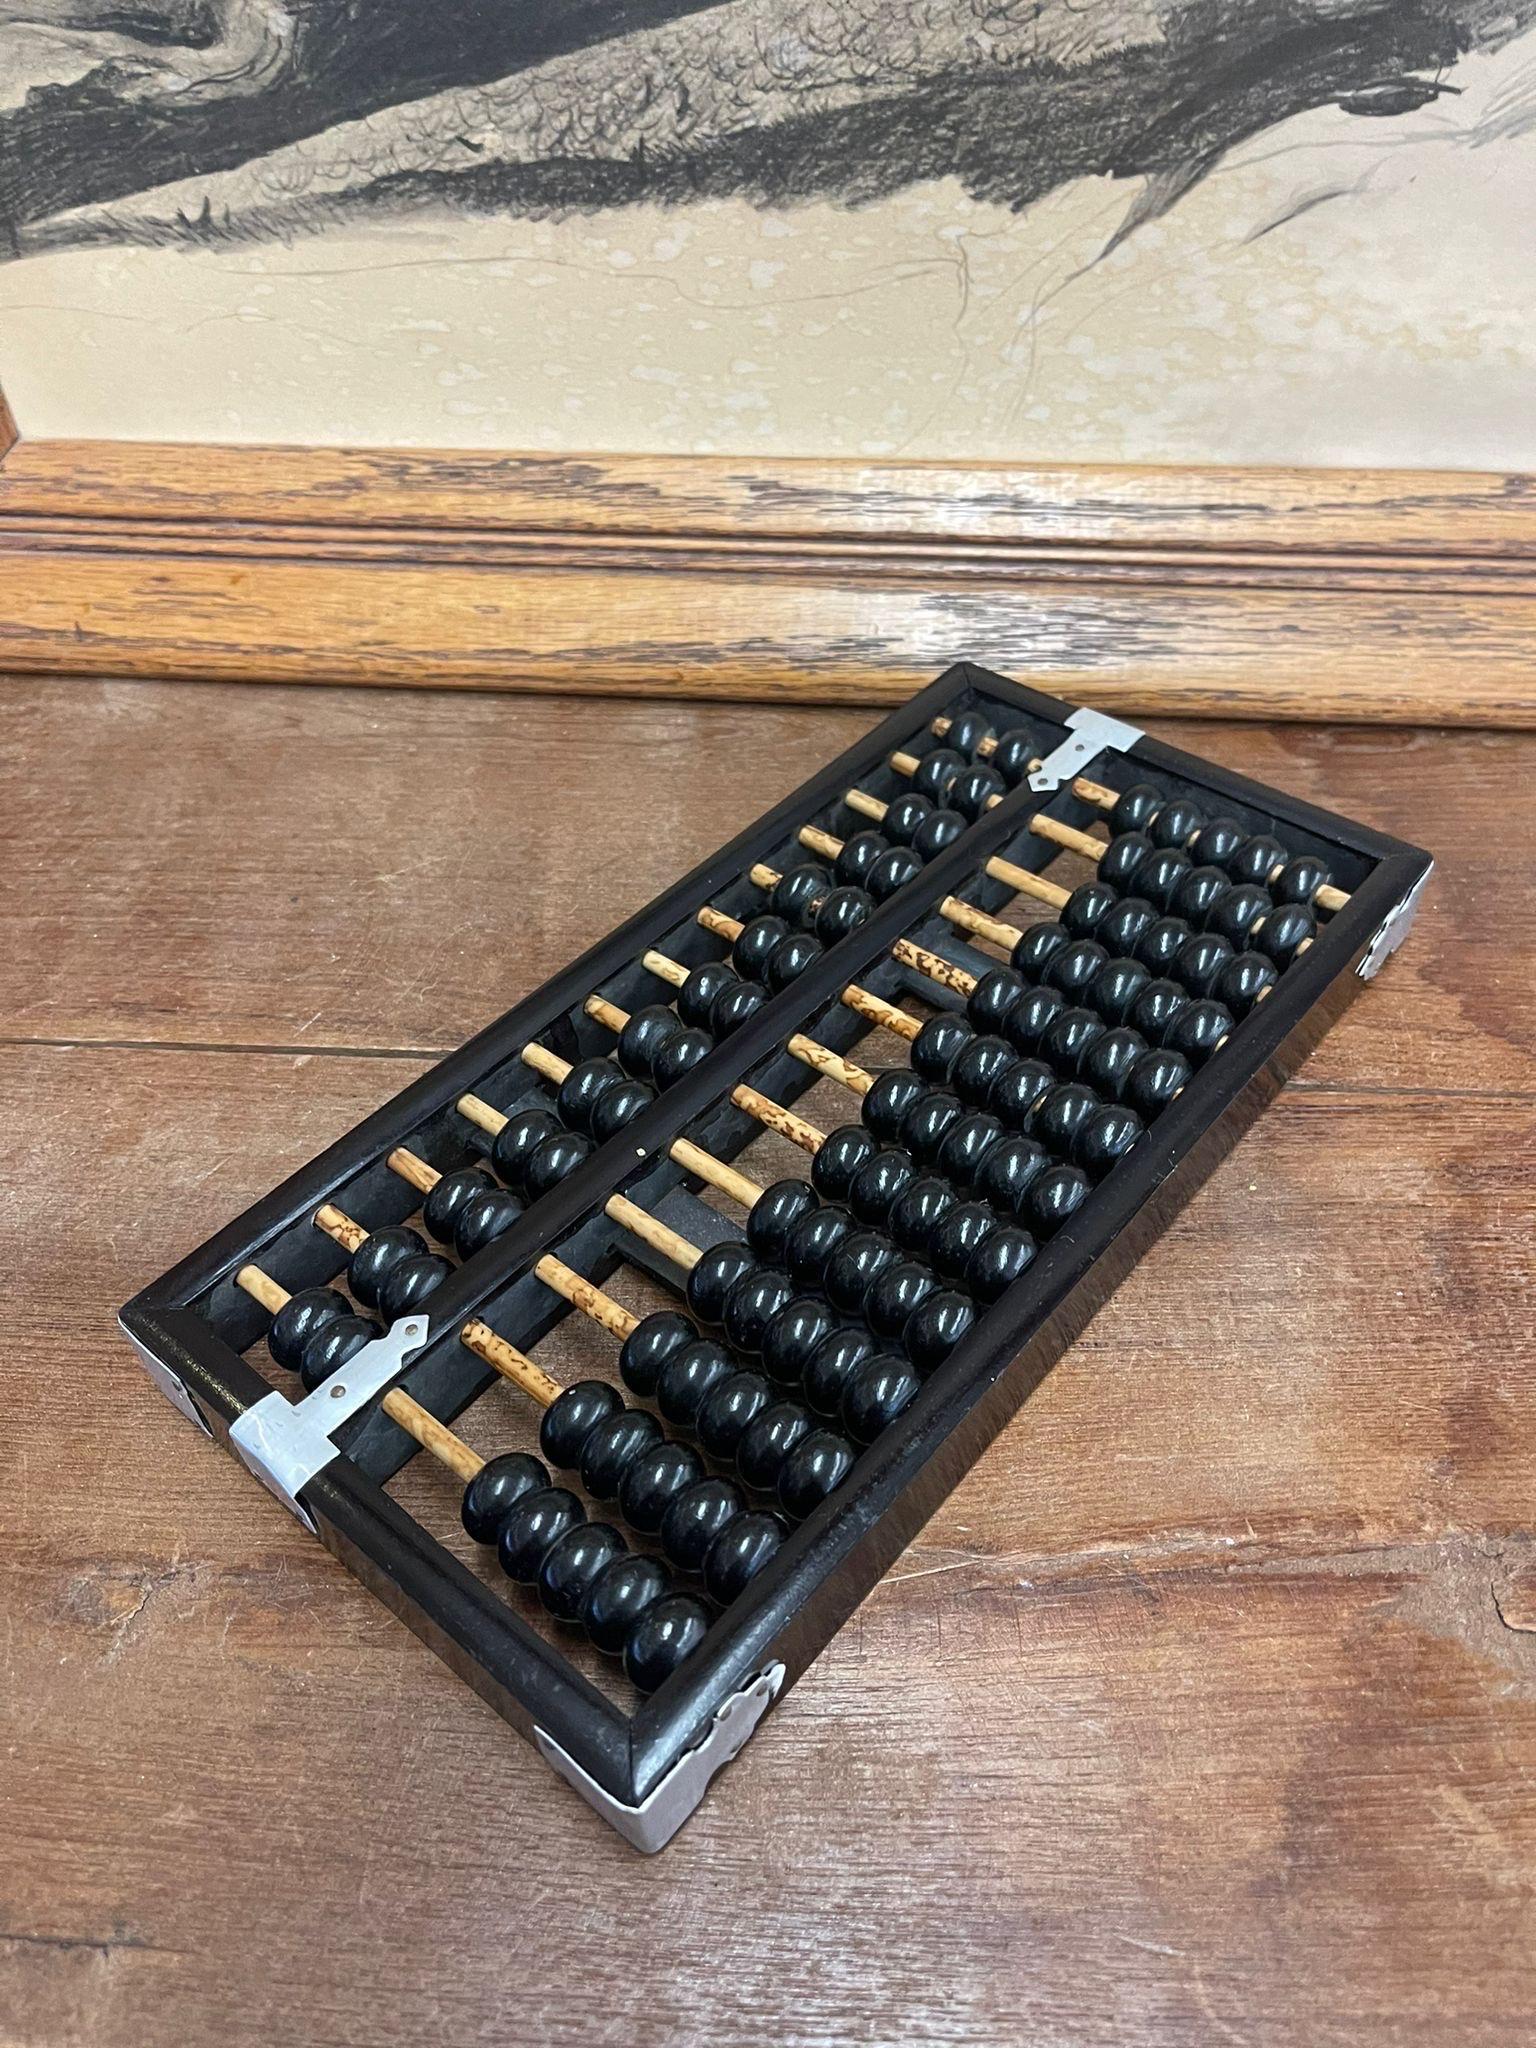 This Abacus has black painted wood framing and beads. The rods have been left unpainted, showcasing beautiful wood grain. Vintage Condition Consistent with Age as Pictured.

Dimensions. 9 2/2 W ; 5 D ; 1 H